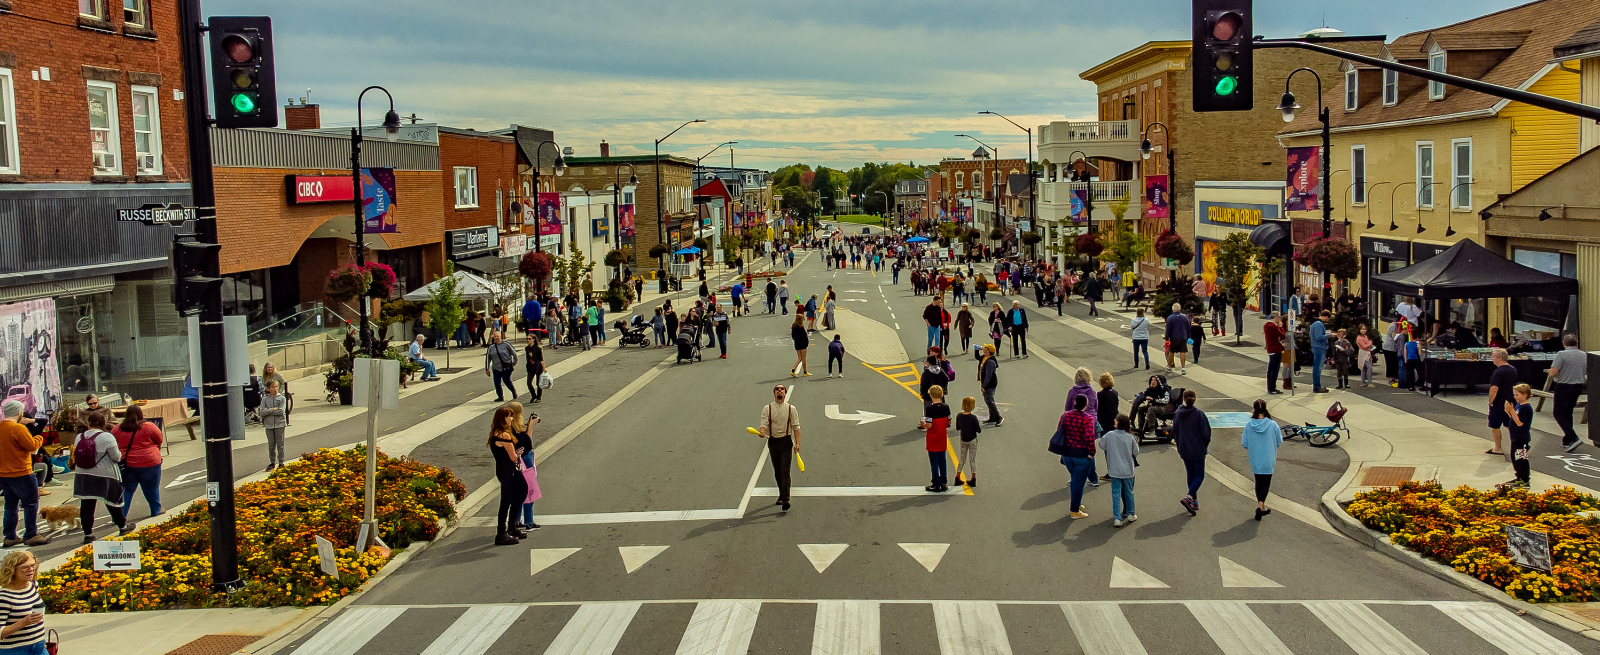 Downtown Smiths Falls streets with people walking